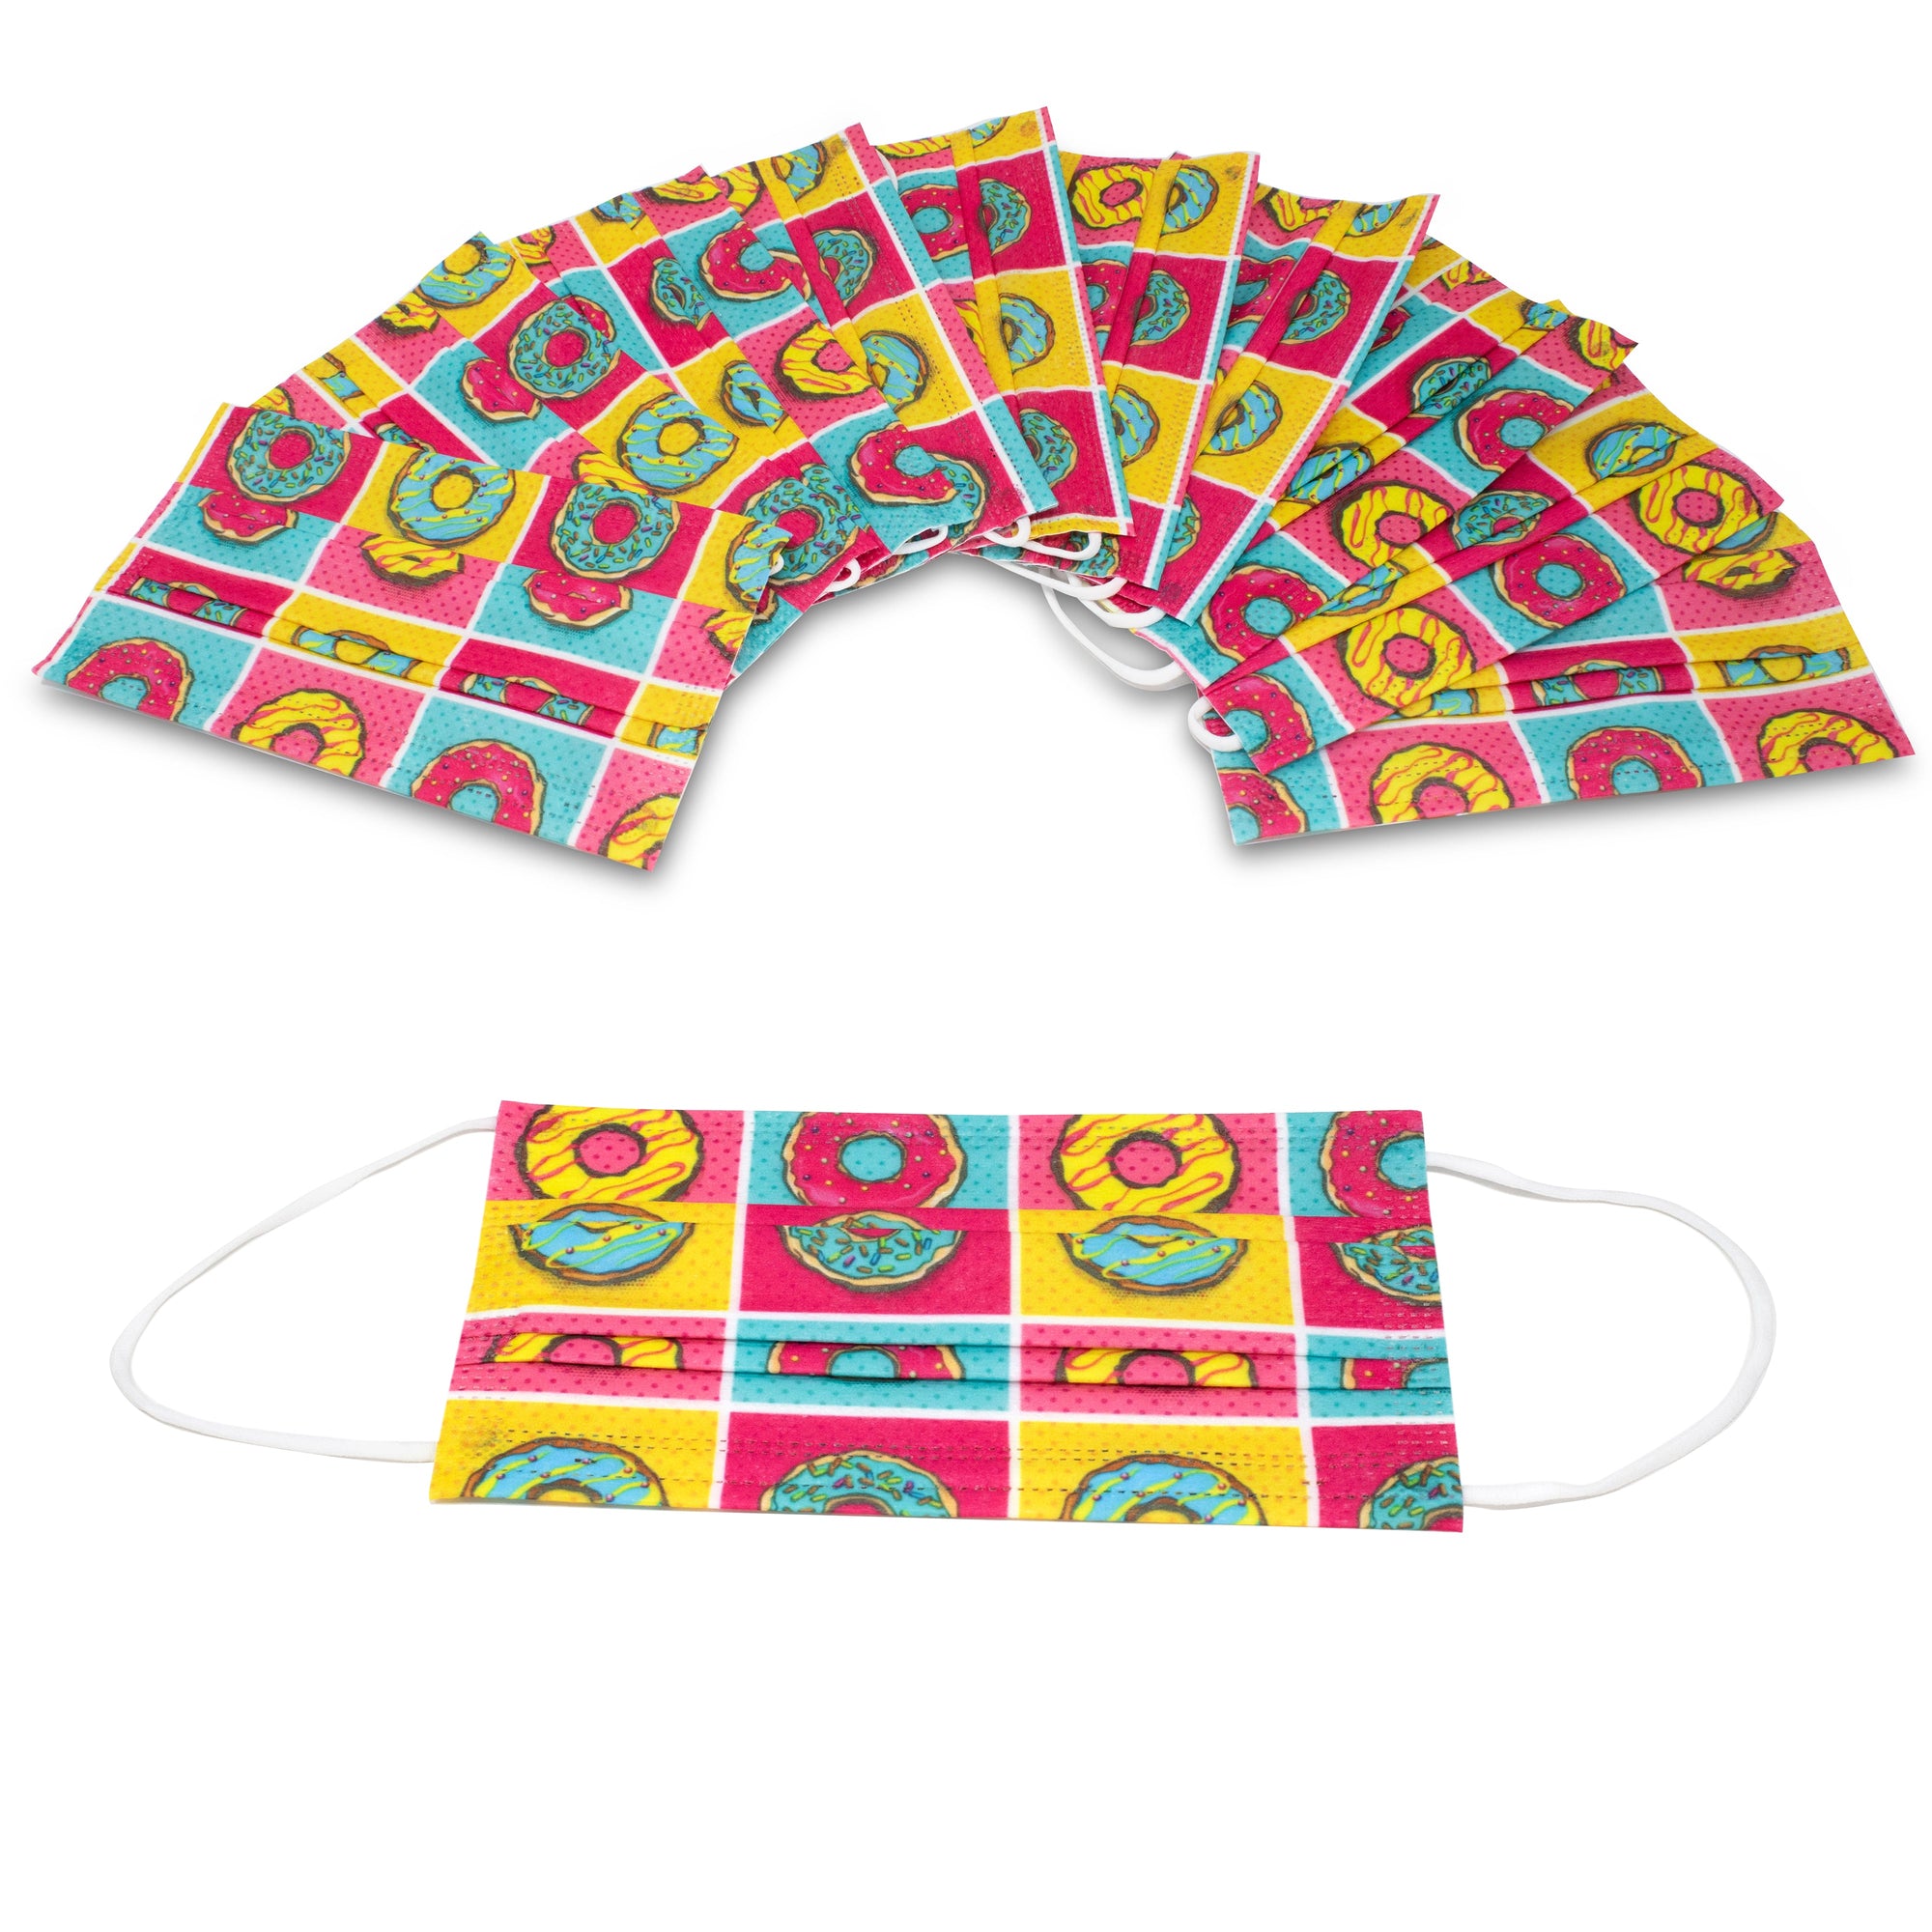 Disposable Print Masks 10 Pack. With a variety of colored prints, these masks are perfect for protecting yourself while keeping a sense of style. Colorful fabric surgical masks.